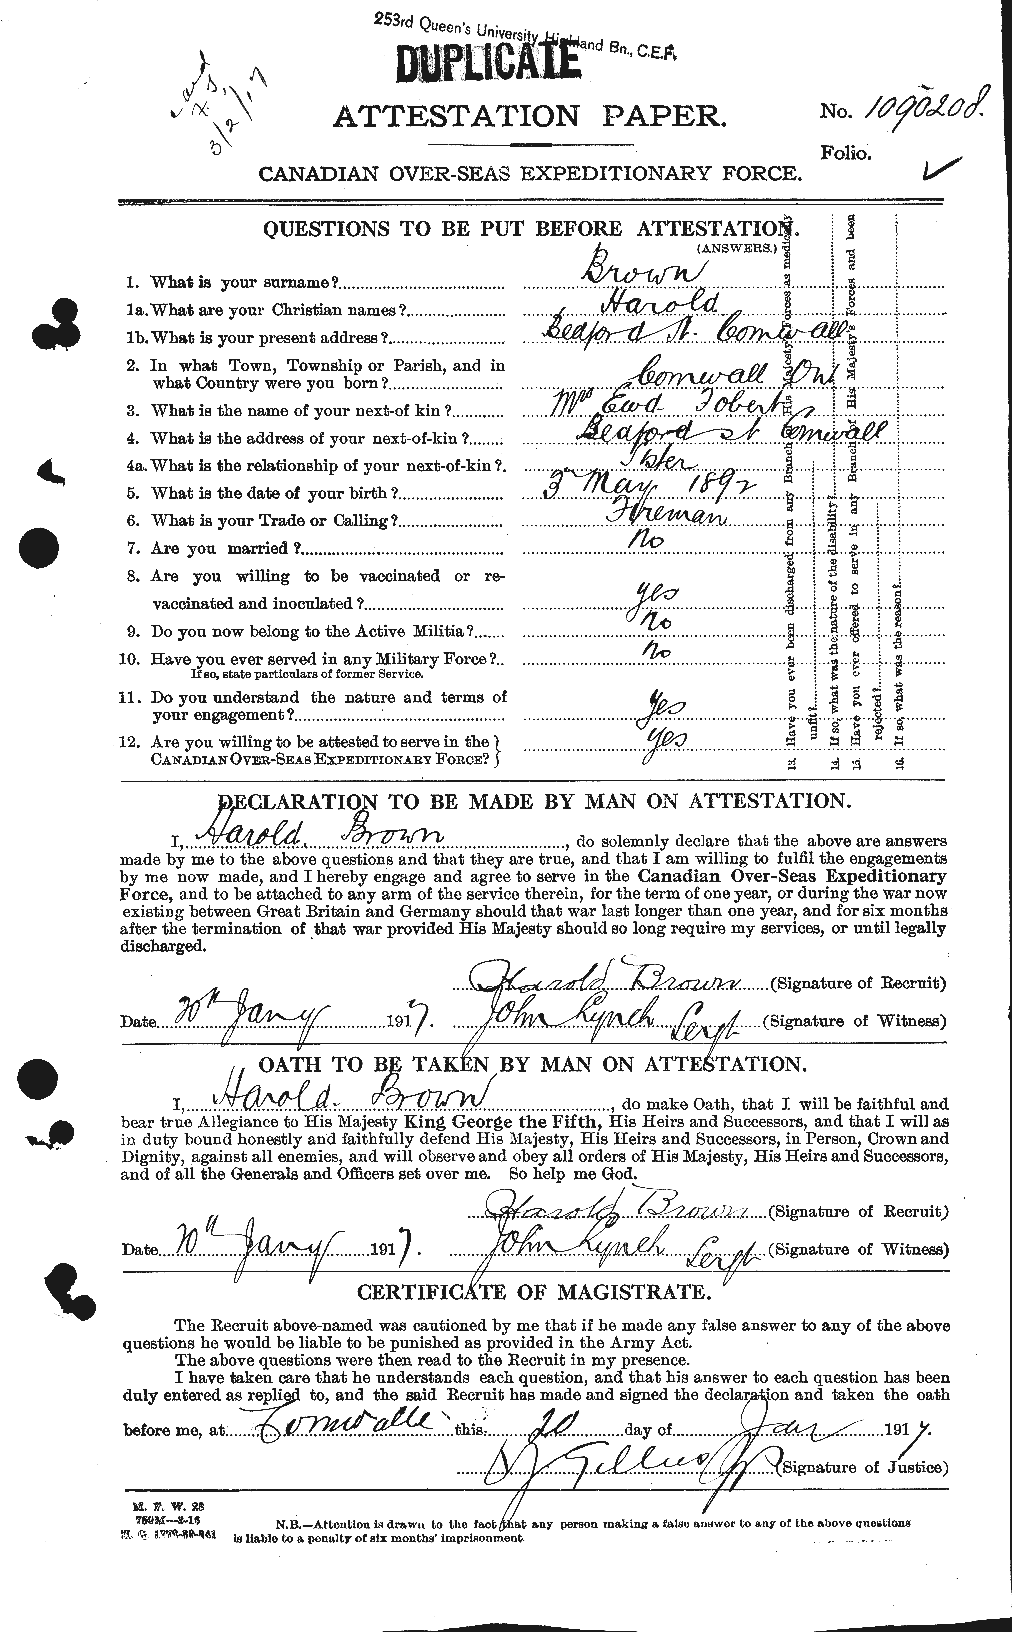 Personnel Records of the First World War - CEF 262667a